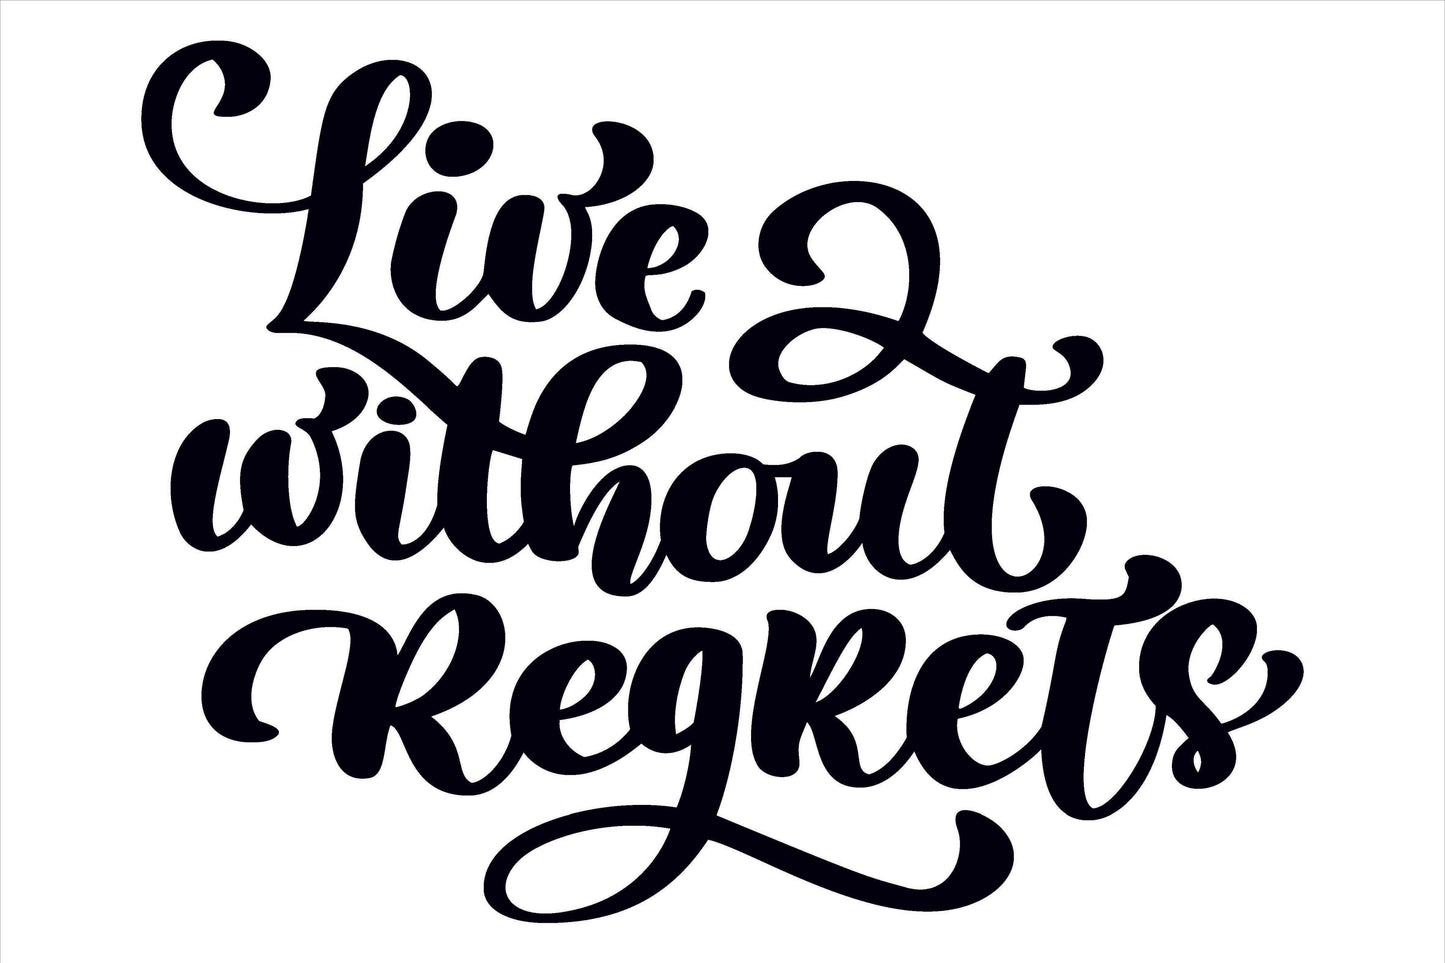 Live Without Regrets